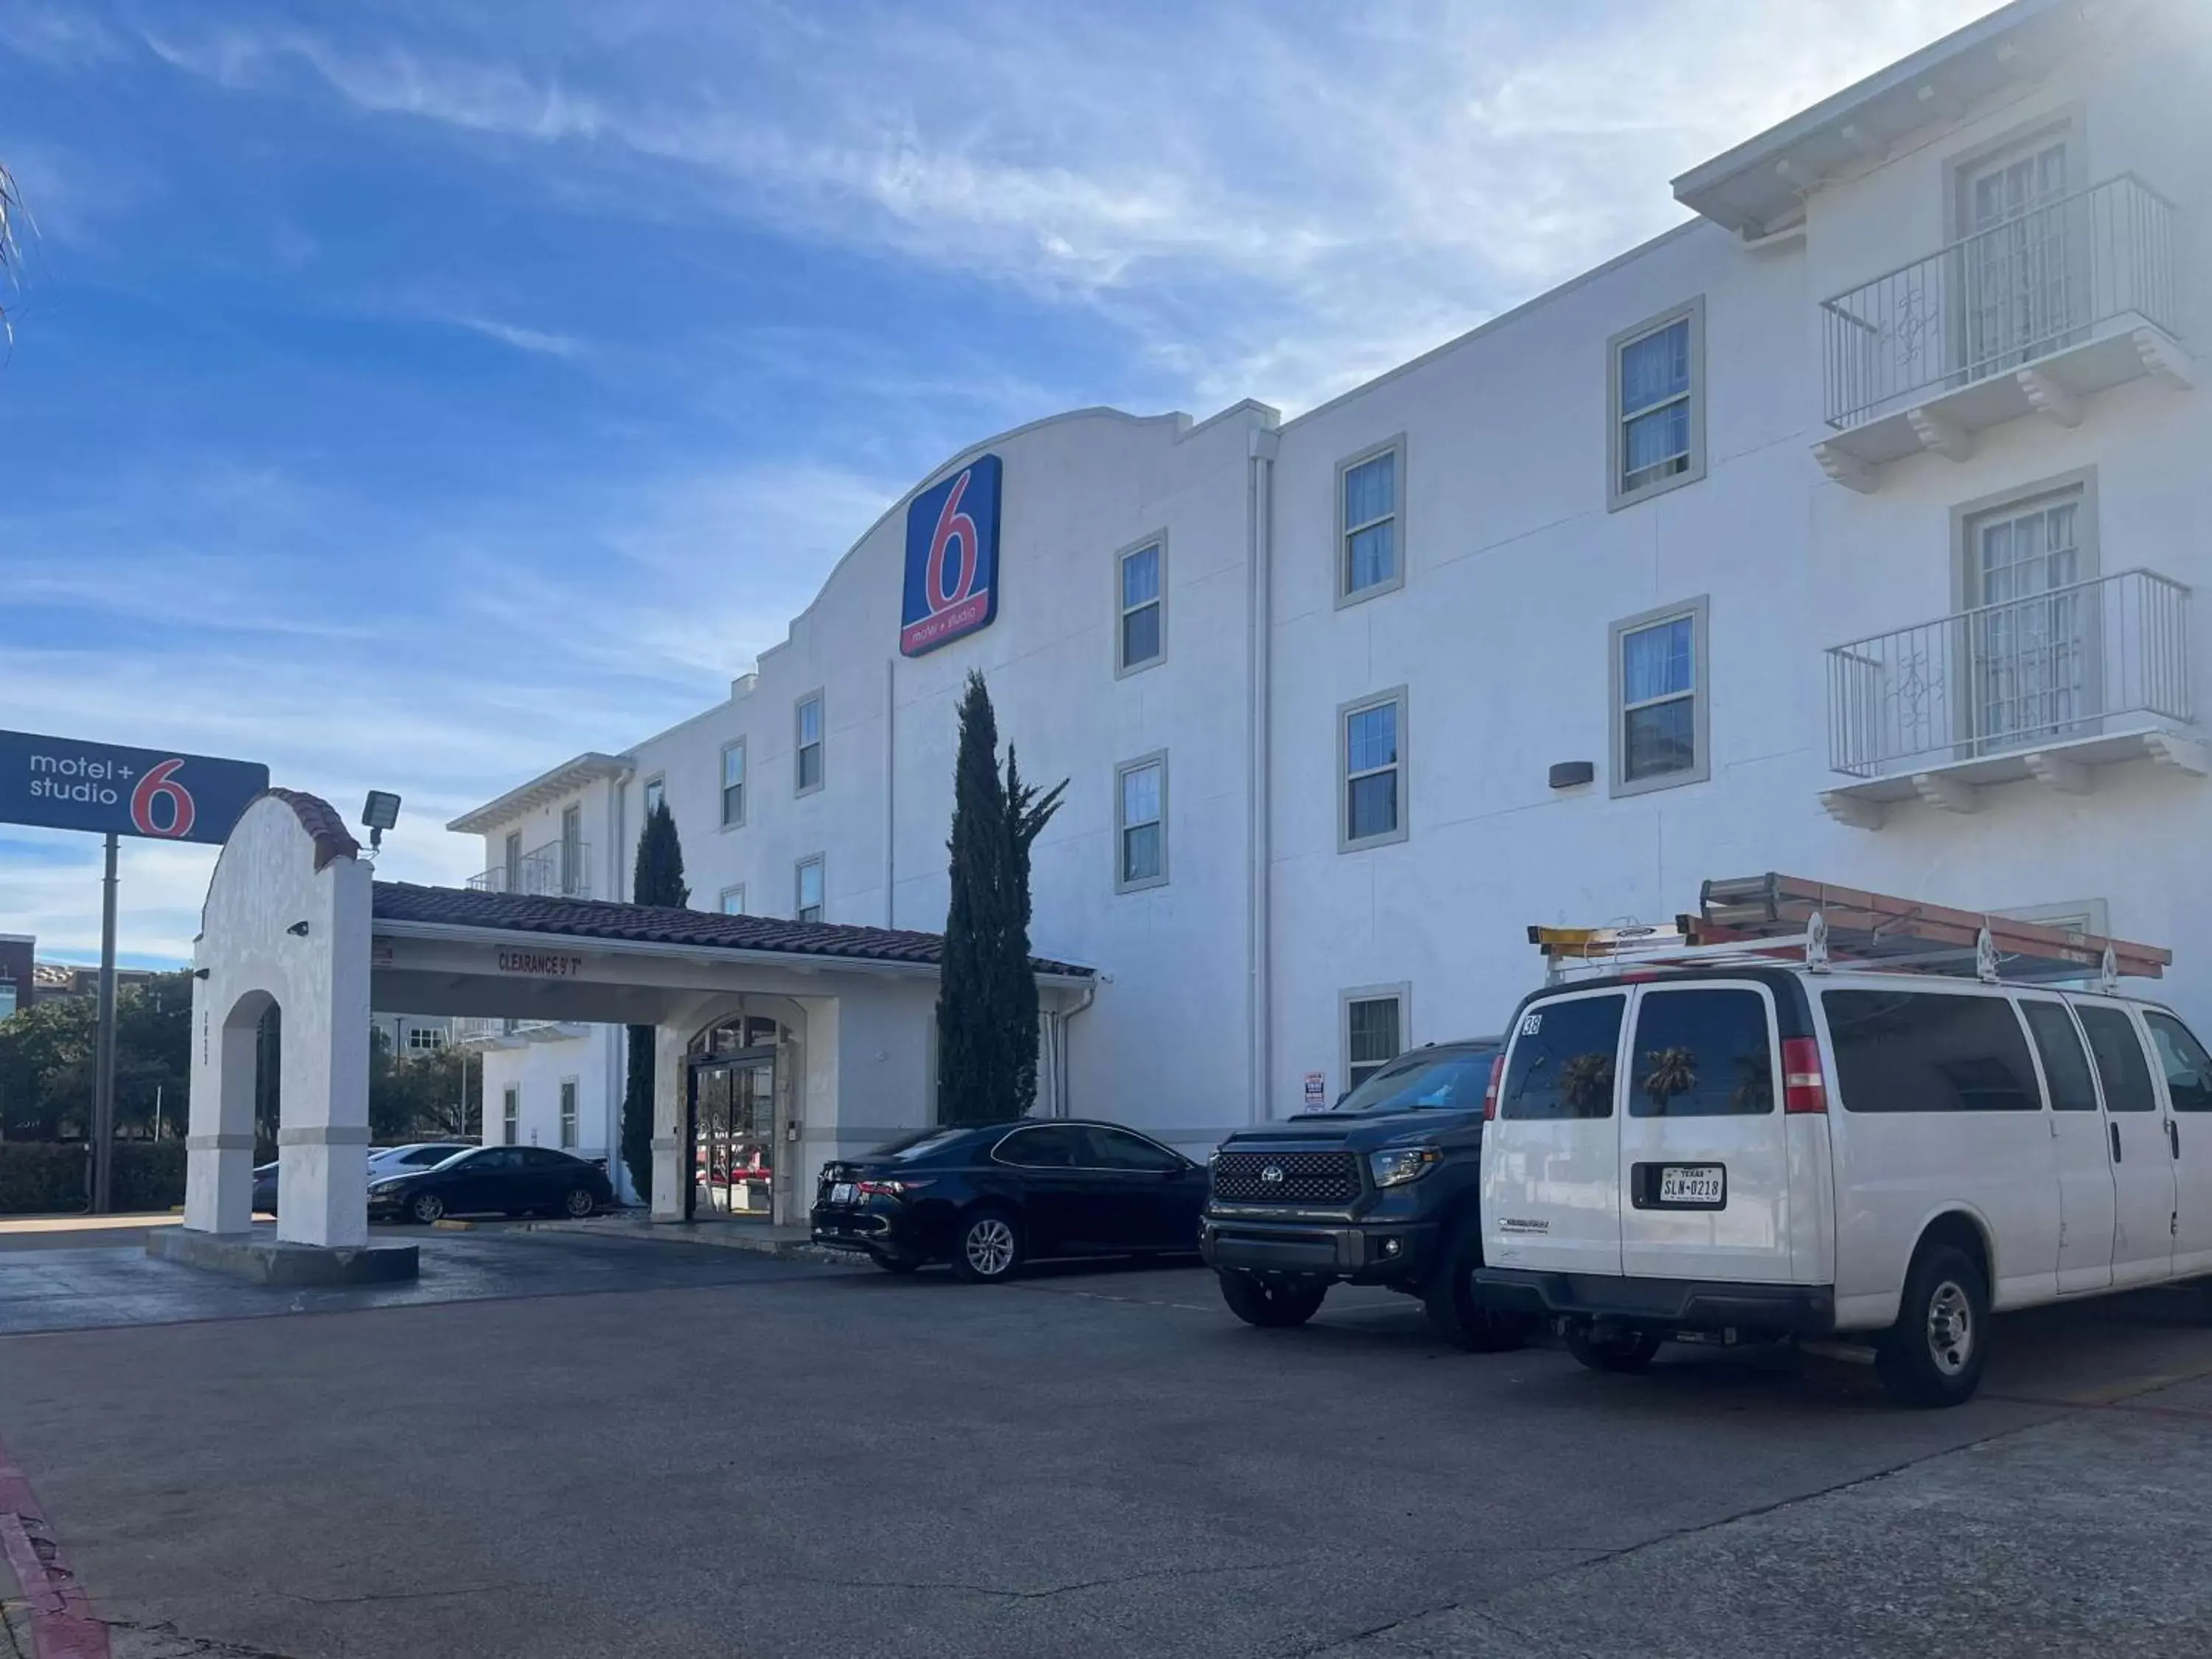 Property Building in Motel 6 Dallas TX Downtown